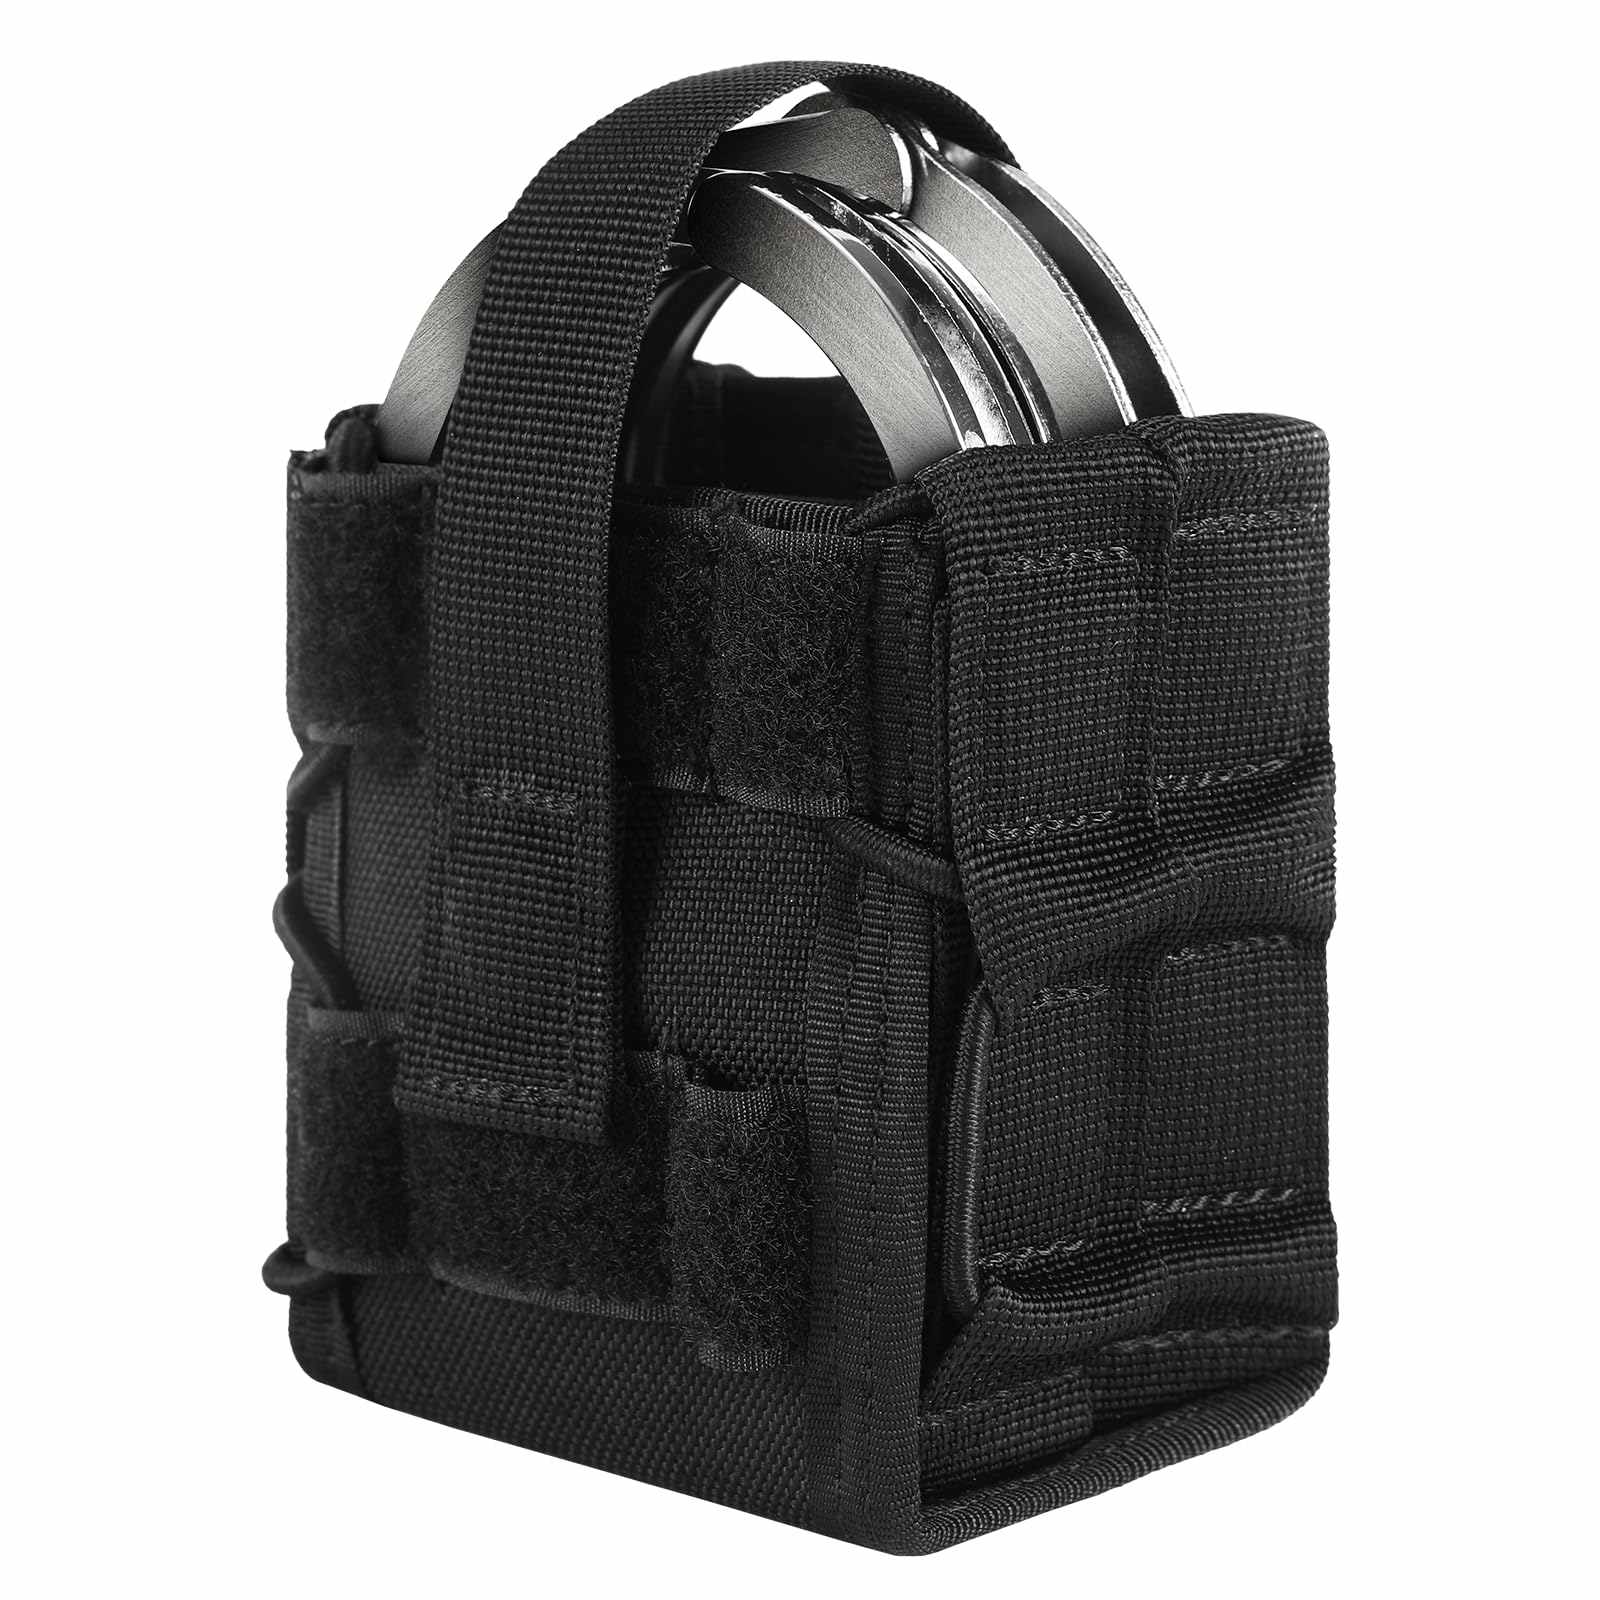 Double Handcuff Pouch Open-Top MOLLE Tactical Handcuff Holster